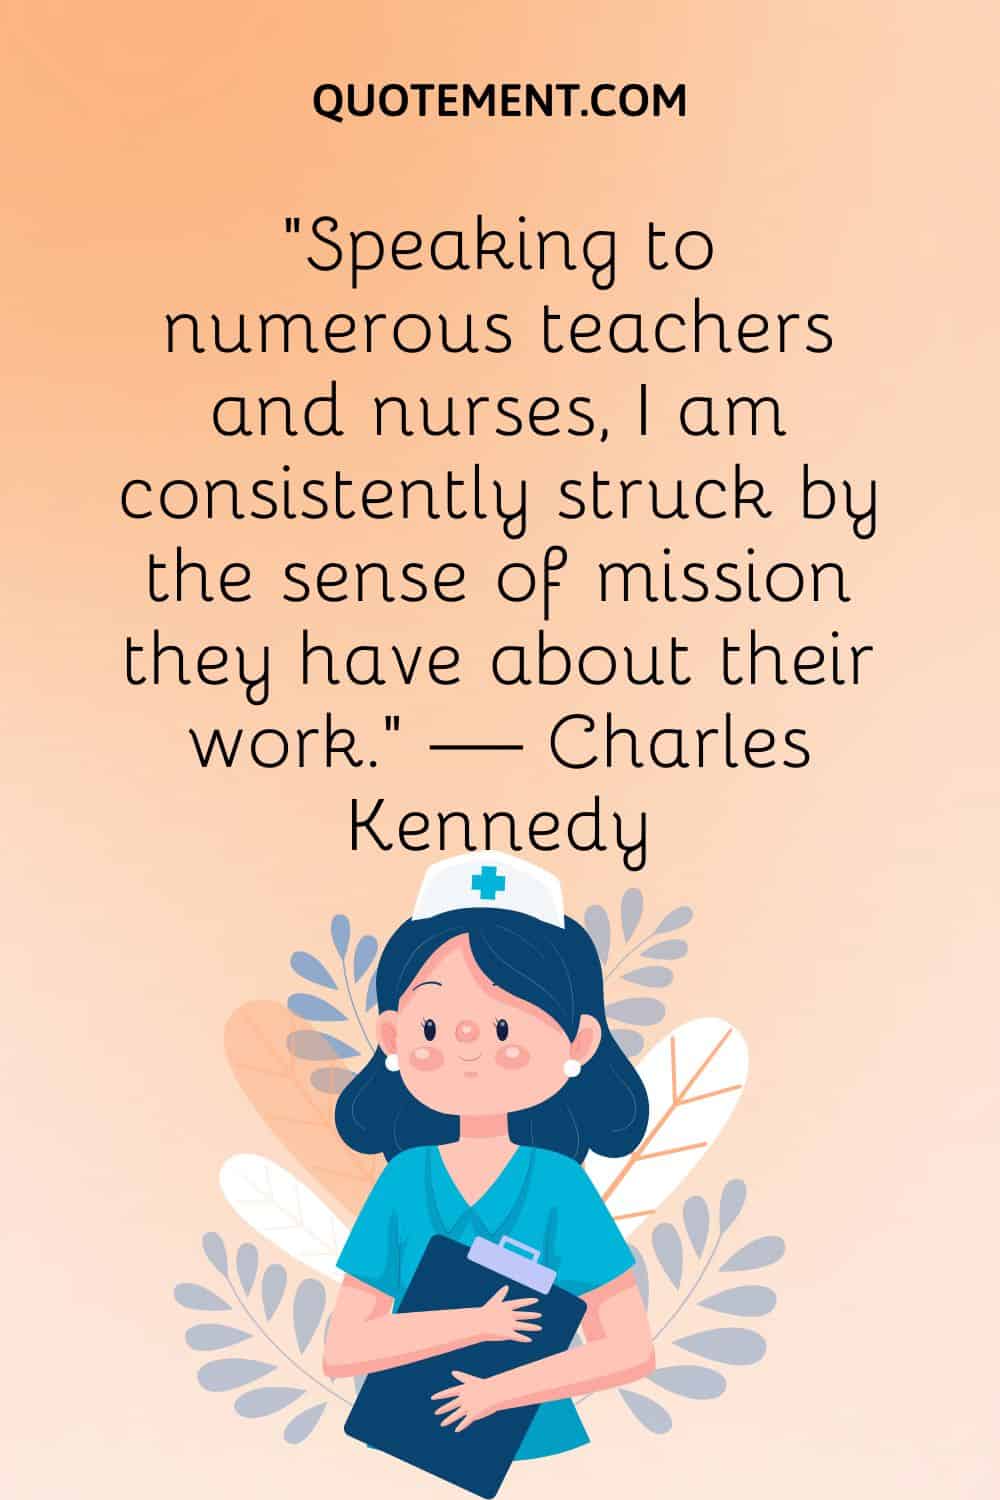 “Speaking to numerous teachers and nurses, I am consistently struck by the sense of mission they have about their work.” — Charles Kennedy